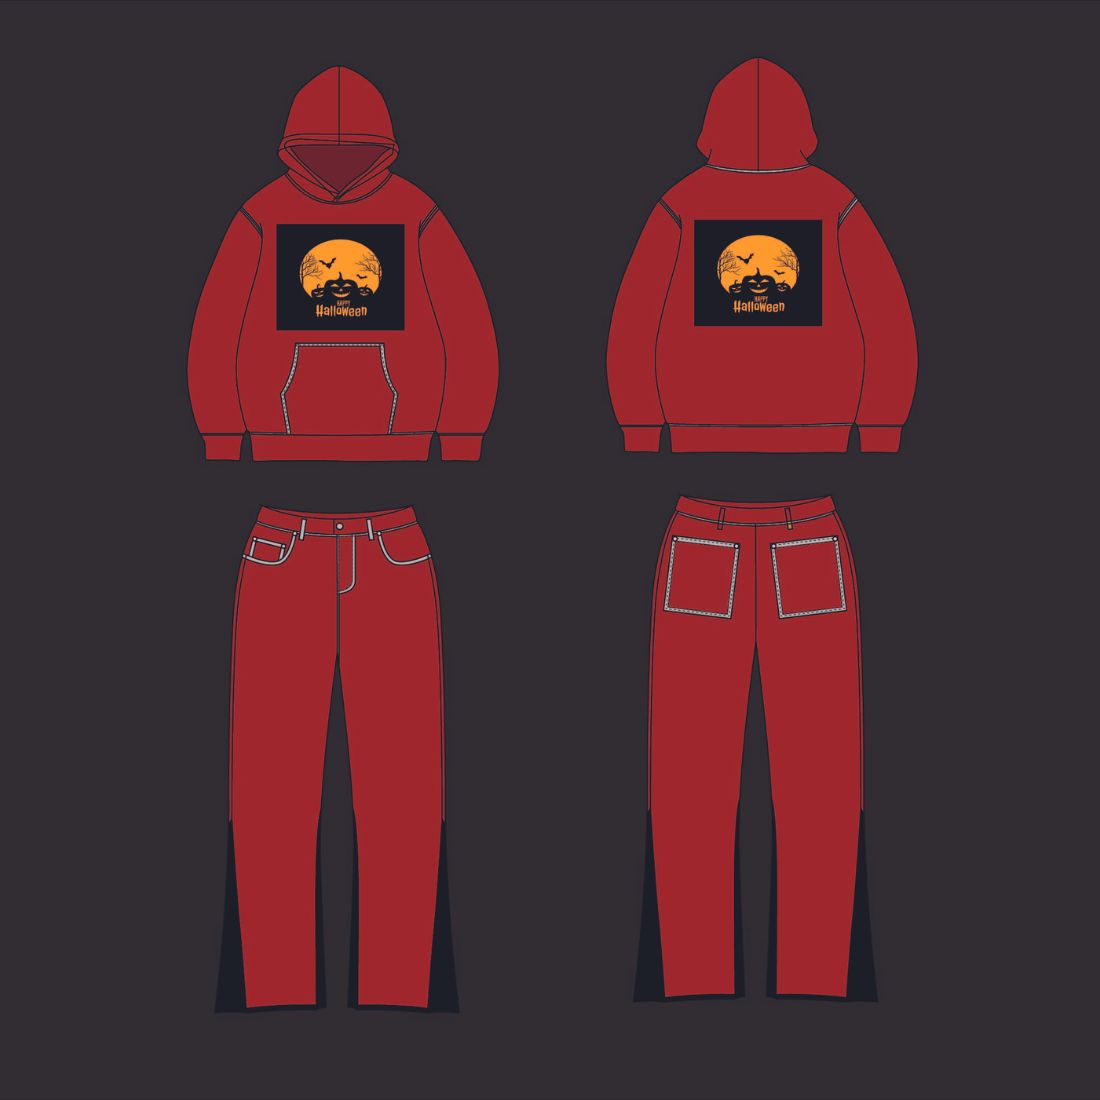 Streetwear Oversize Hoodie / Flared Joggers Vector Mockup Illustrator, Procreate, PNG, Clothing Custom svg Design Sketch Tech Pack Download preview image.